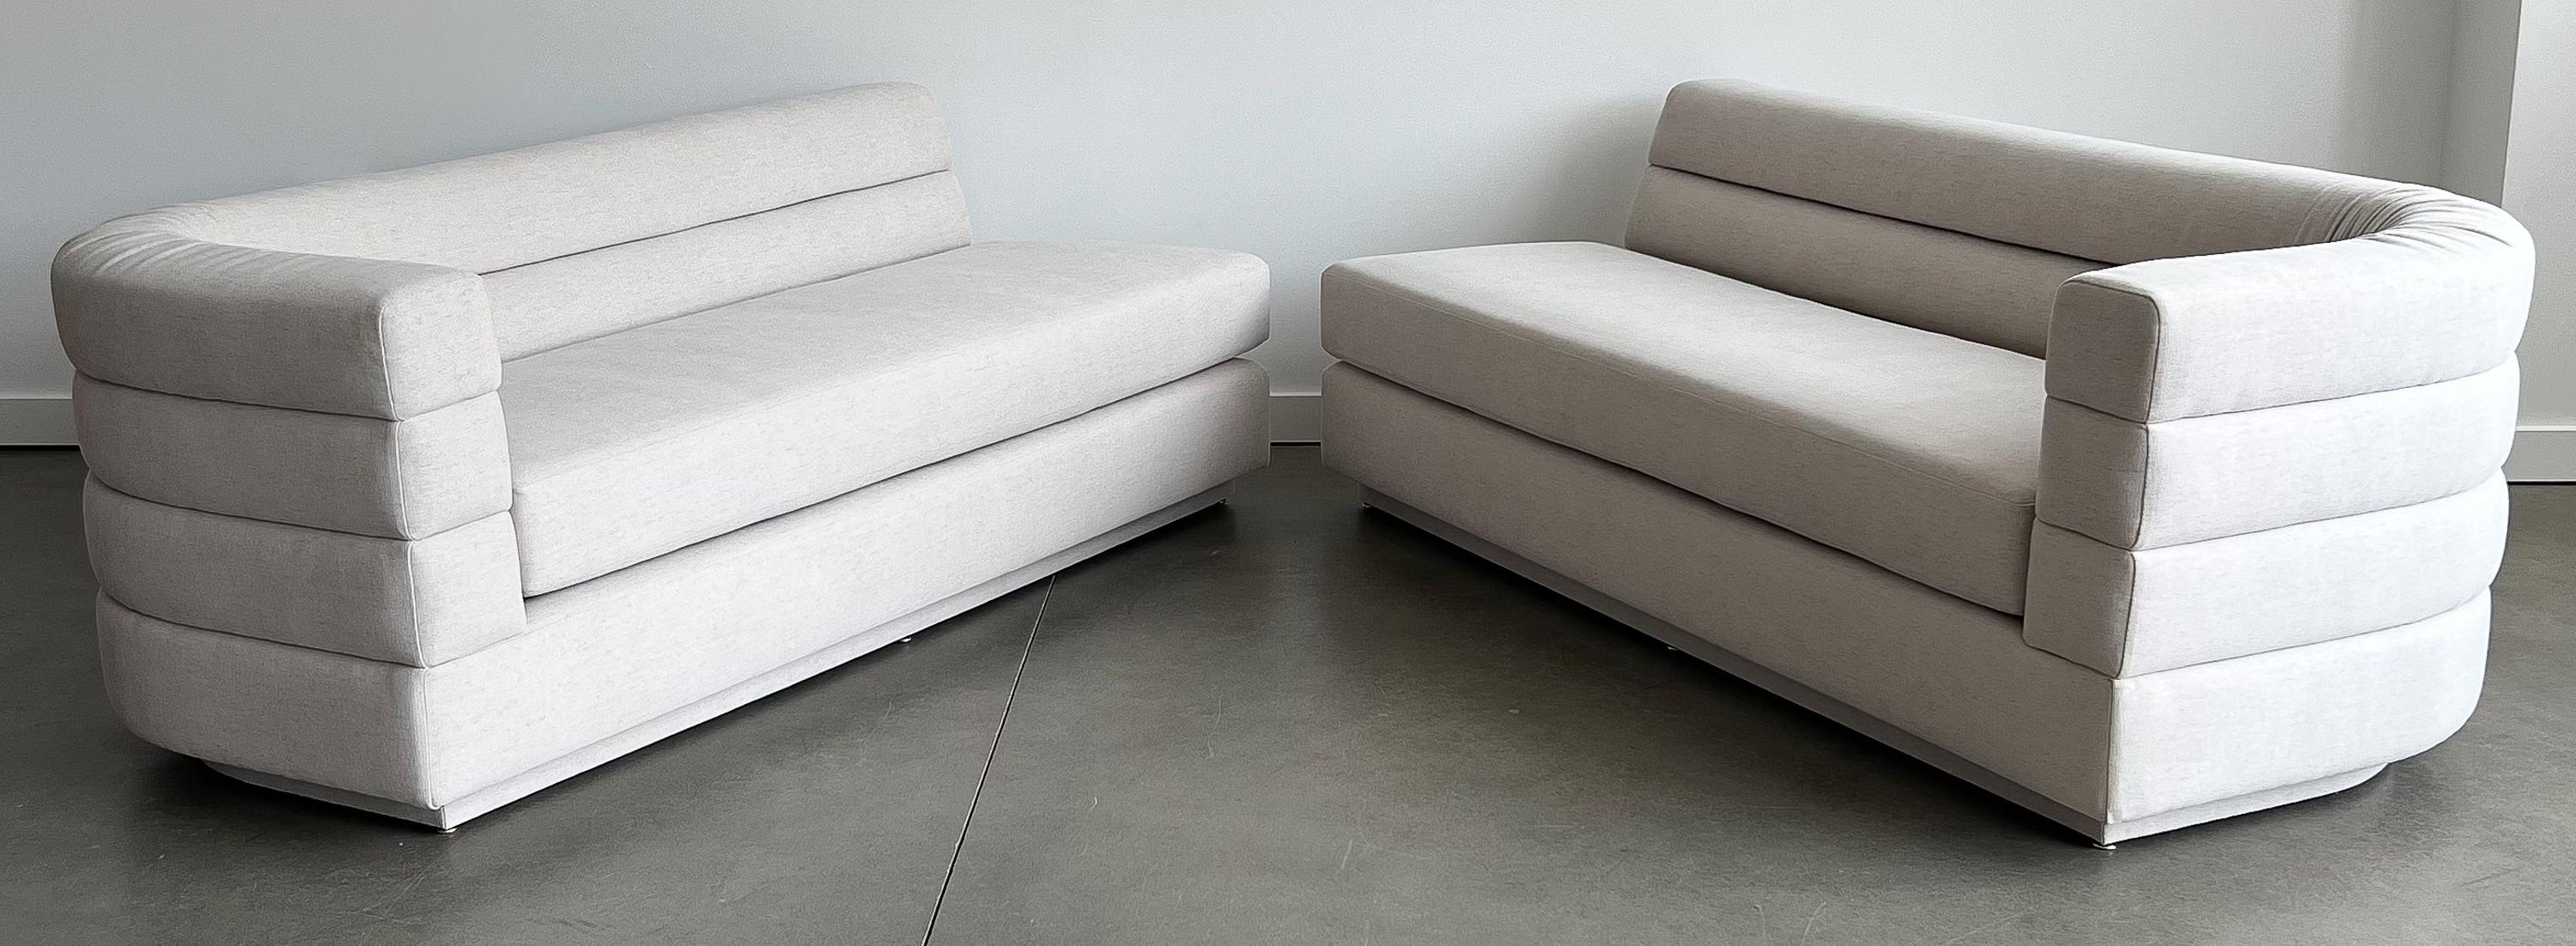 Interior Crafts Channeled Back Two Piece Sofa by Richard Himmel 2